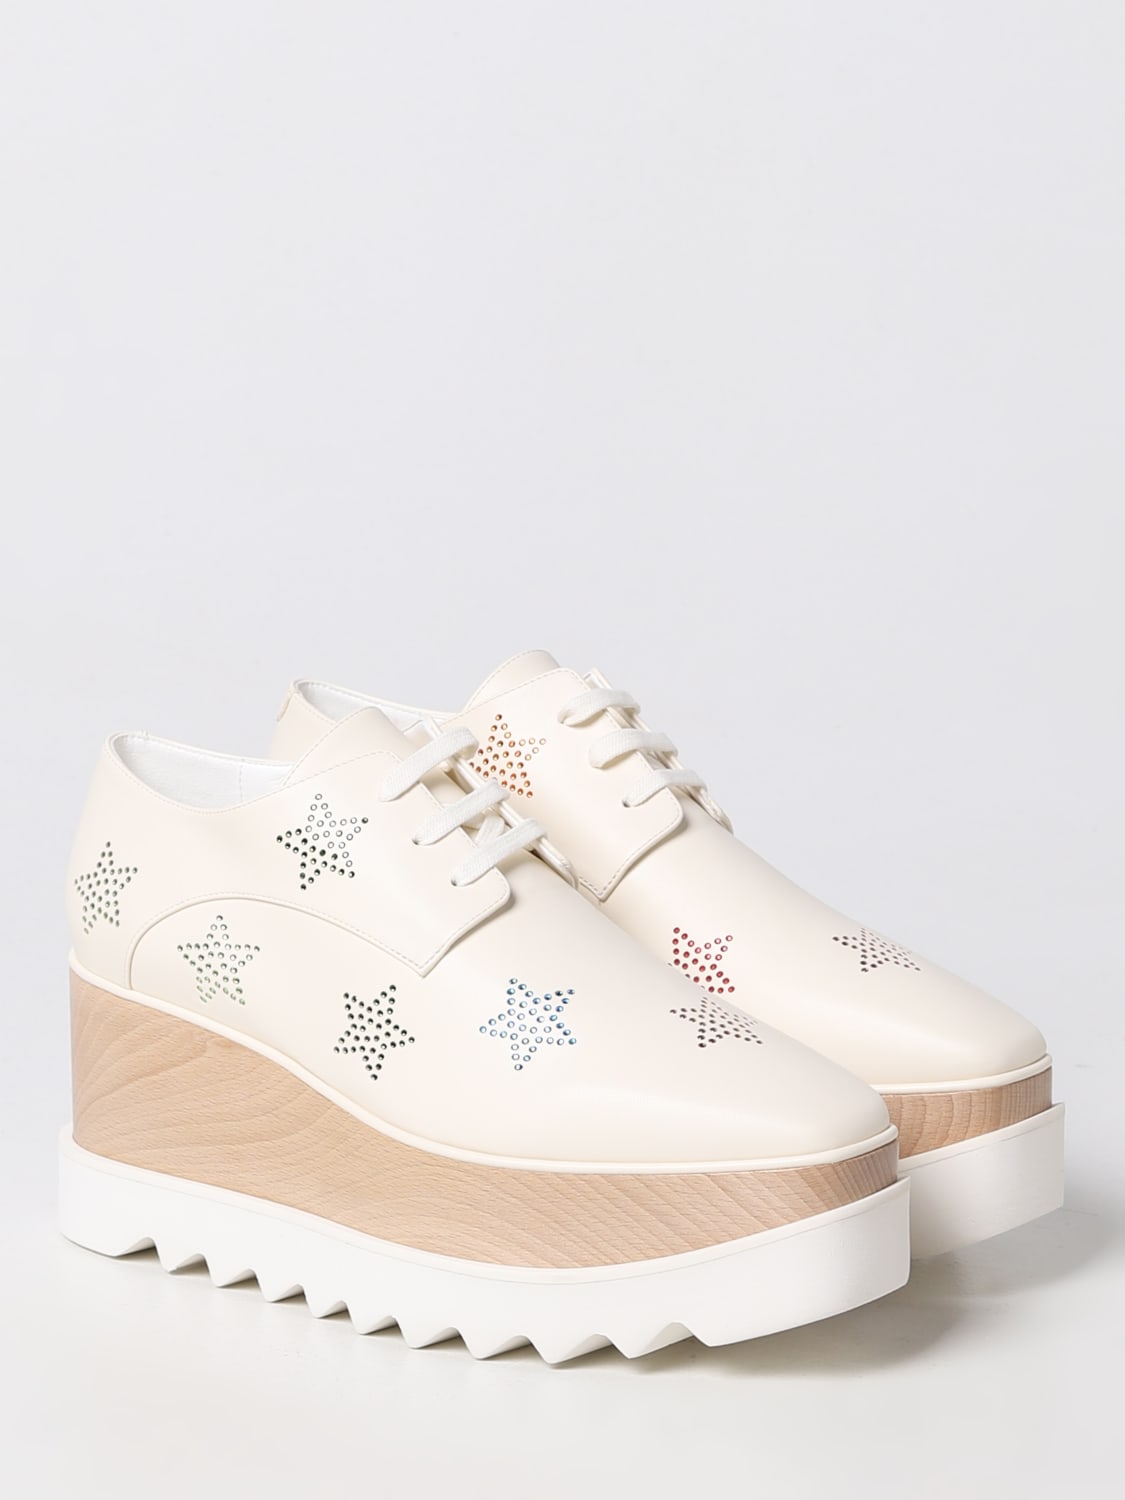 Stella McCartney Elyse sneakers in synthetic leather with rhinestones